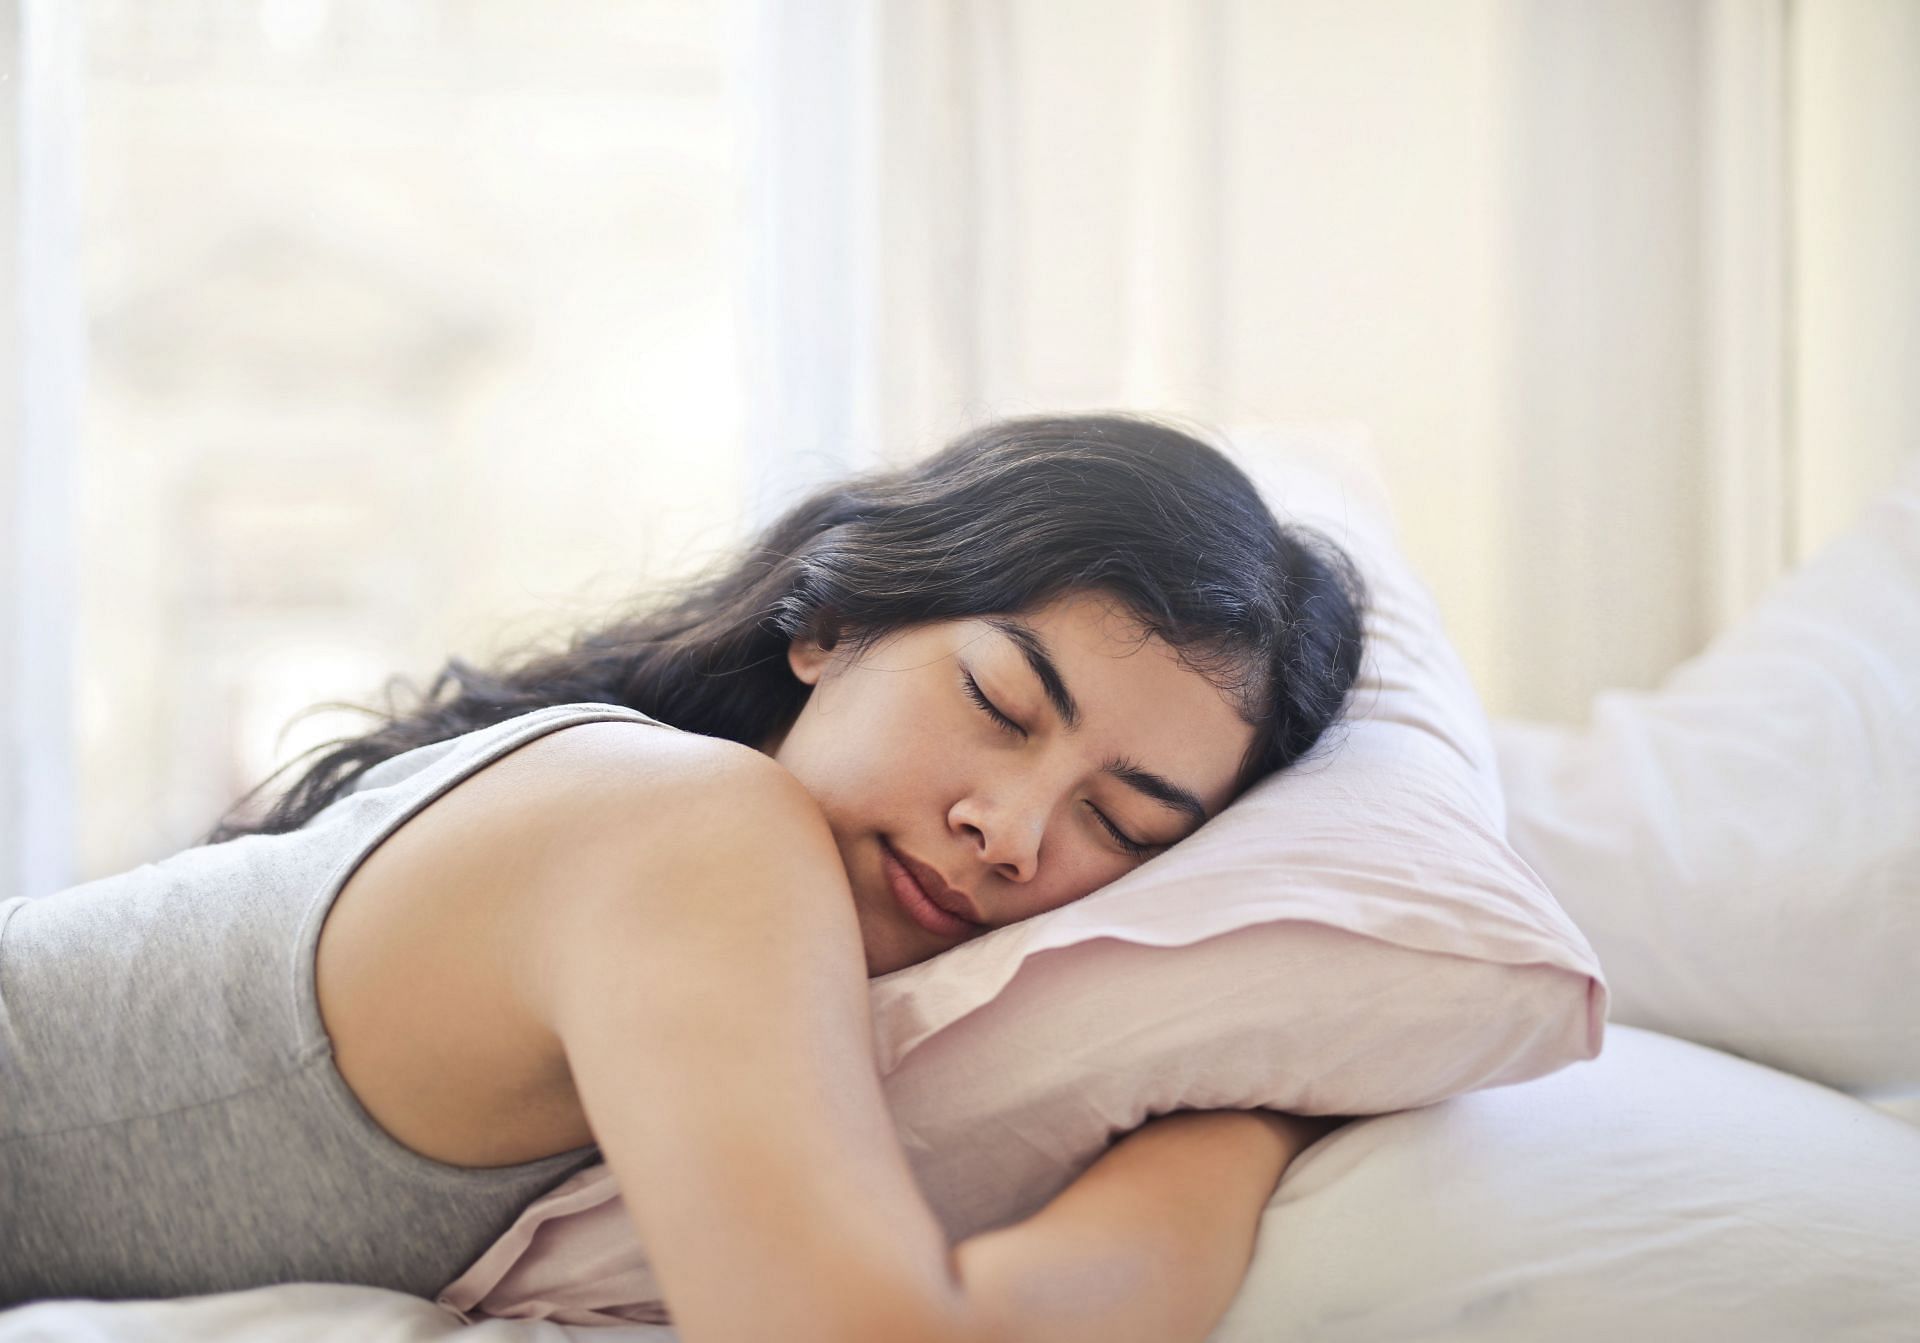 Sleeping on stomach may cause neck pain. (Image via Pexels/Andrea Piacquadio)